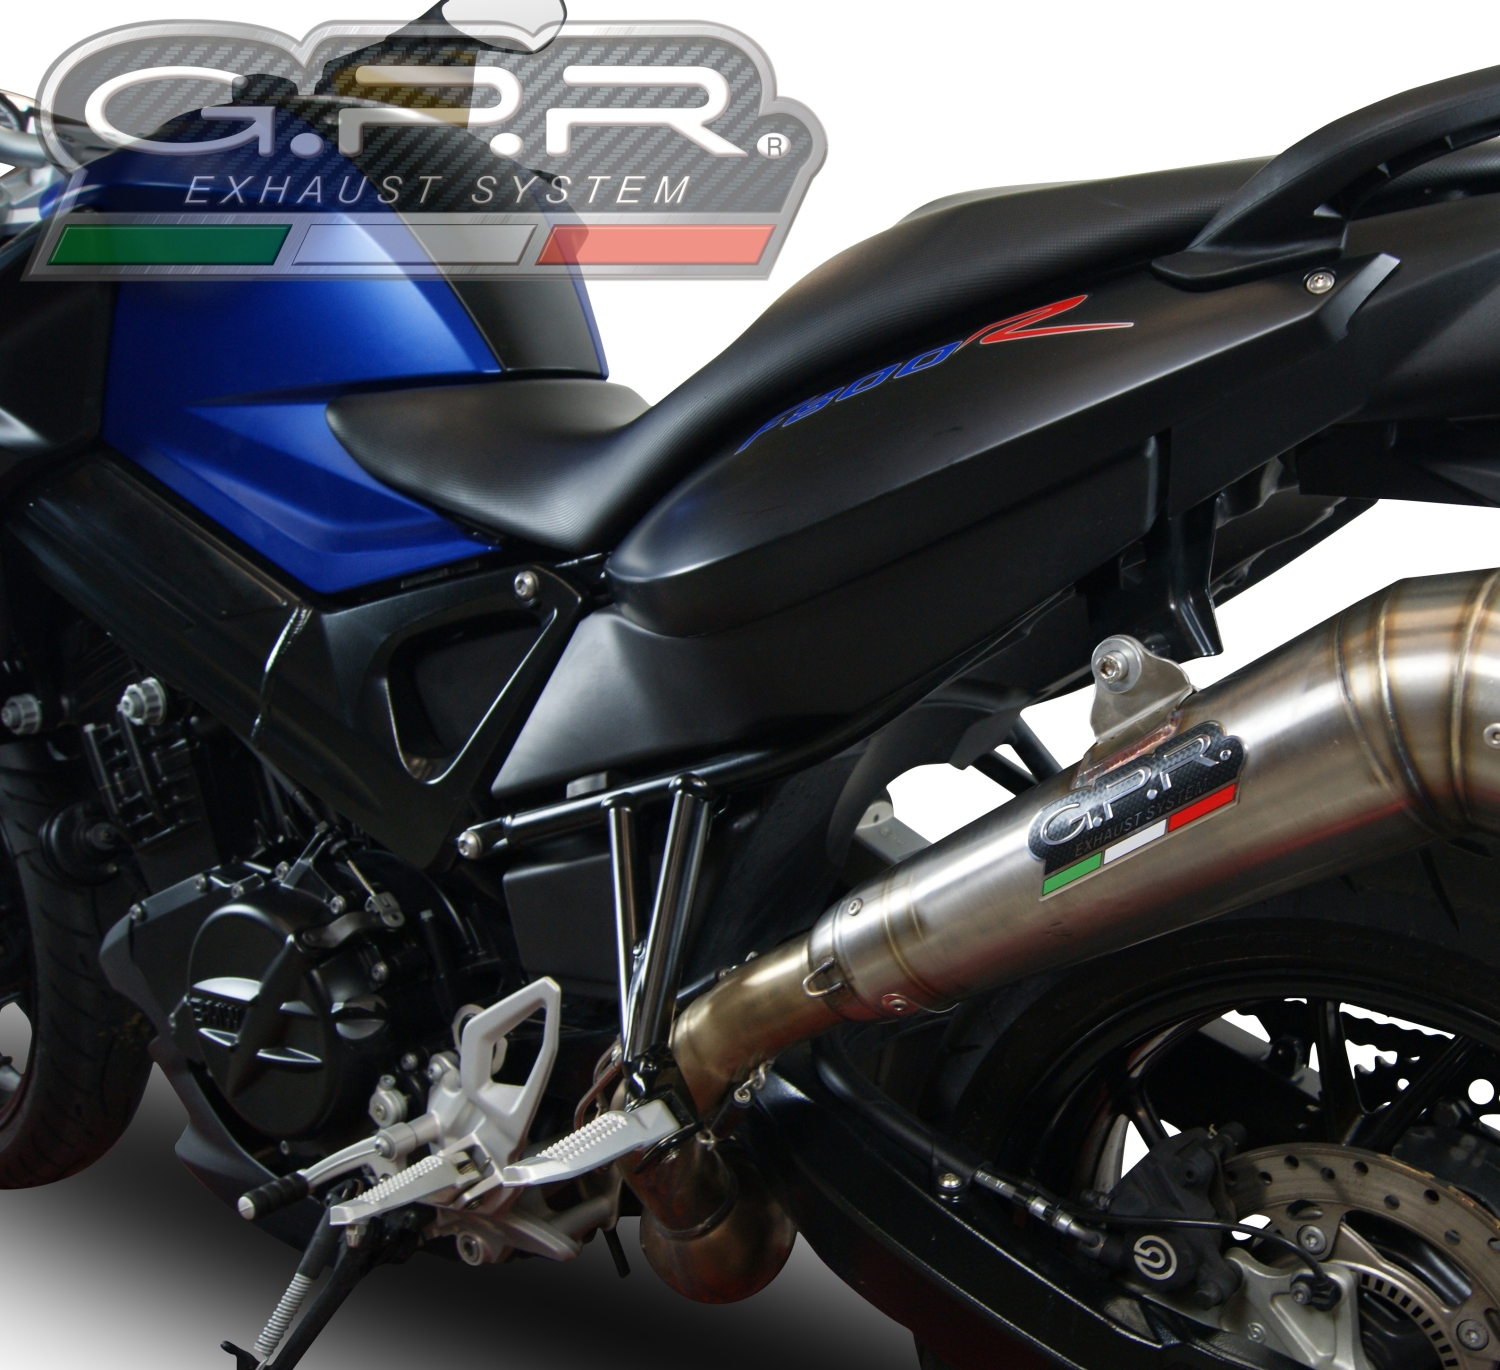 Exhaust system compatible with Bmw F 800 R 2009-2014, Powercone Evo, Homologated legal slip-on exhaust including removable db killer and link pipe 